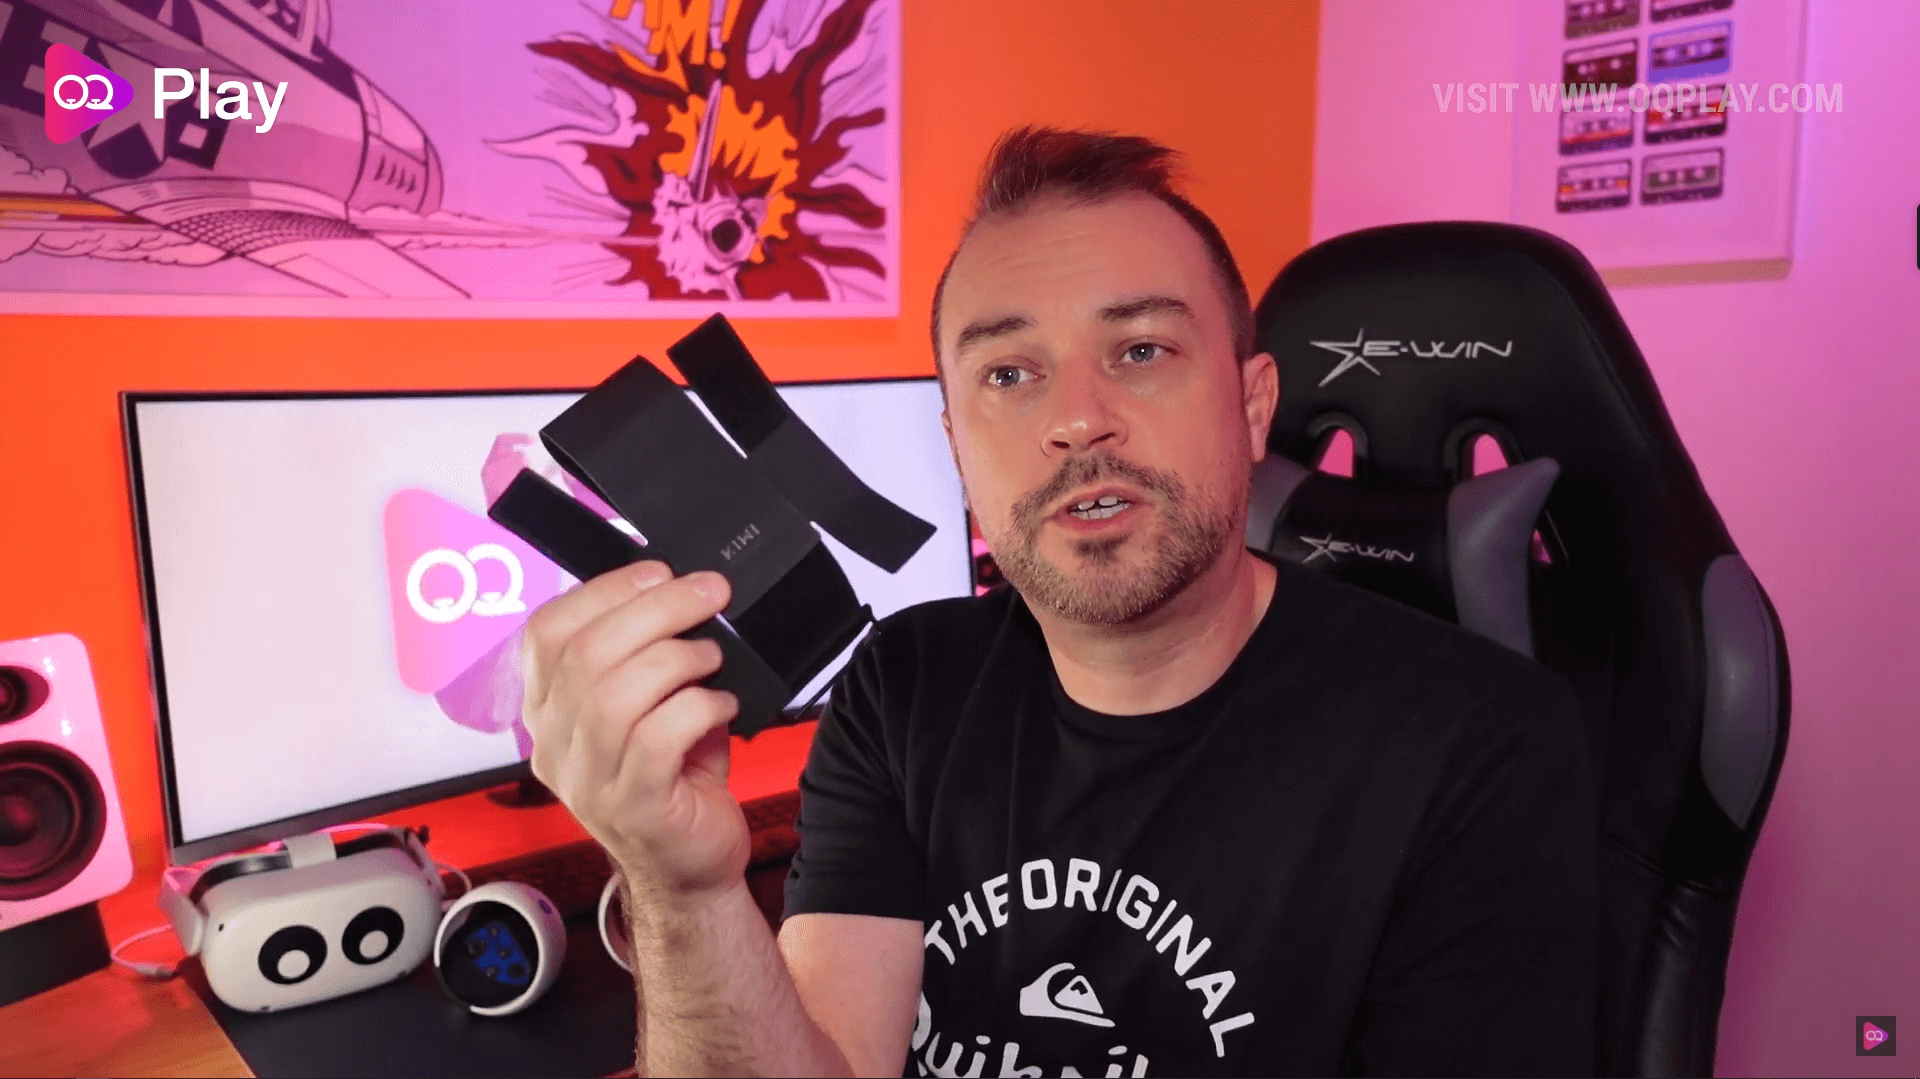 KIWI Design Q21 VR Power Bank Fixing Strap for Oculus Quest 2 – Review on Soft Strap, Elite Strap and Halo Strap